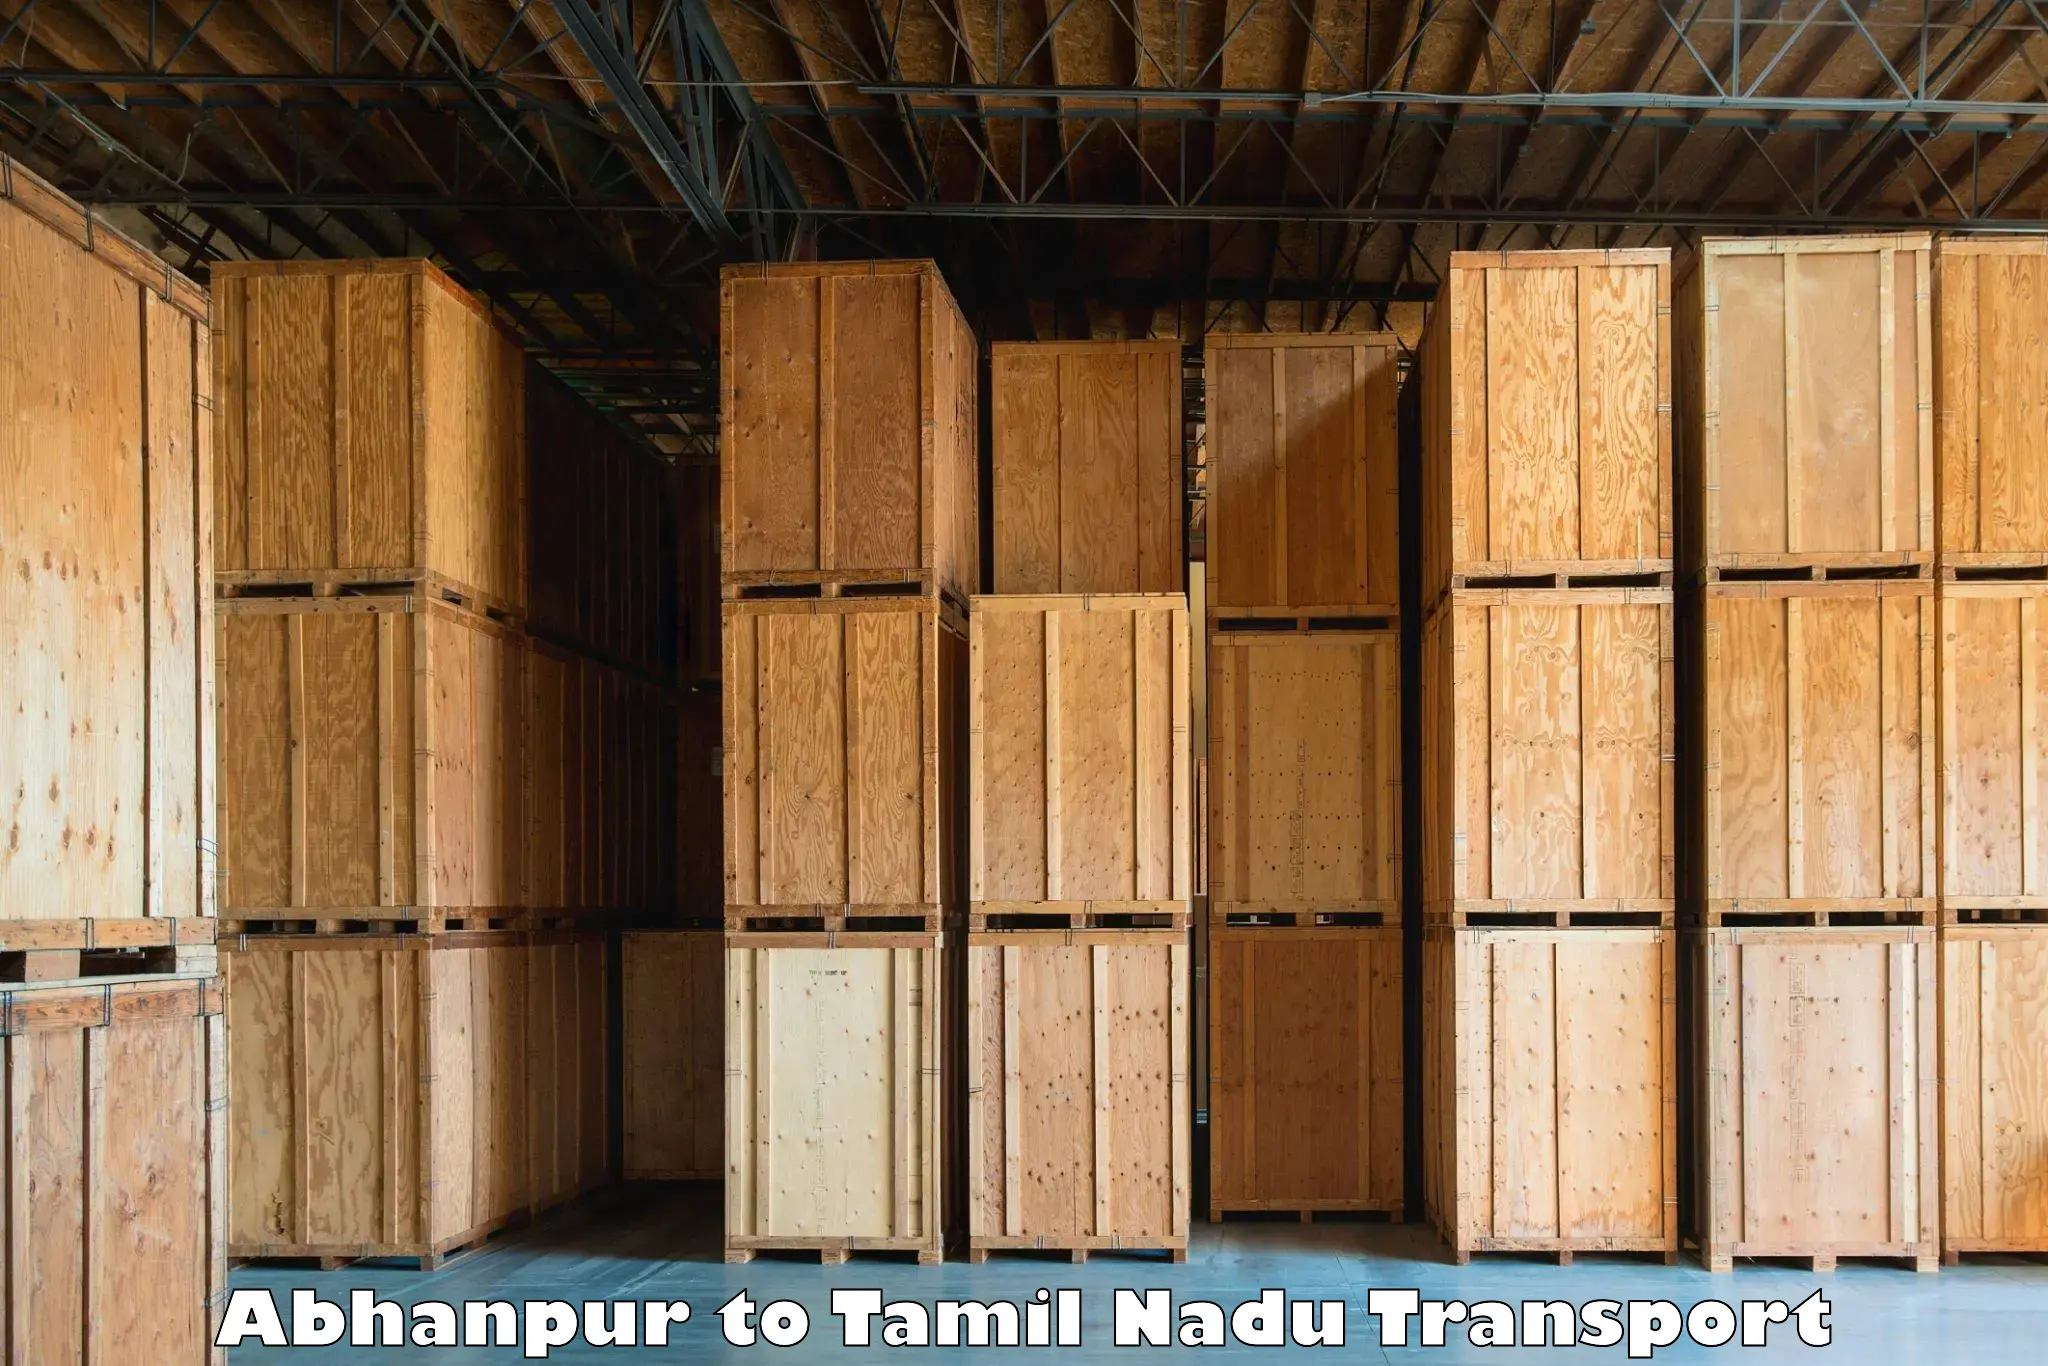 Road transport online services in Abhanpur to Korattur